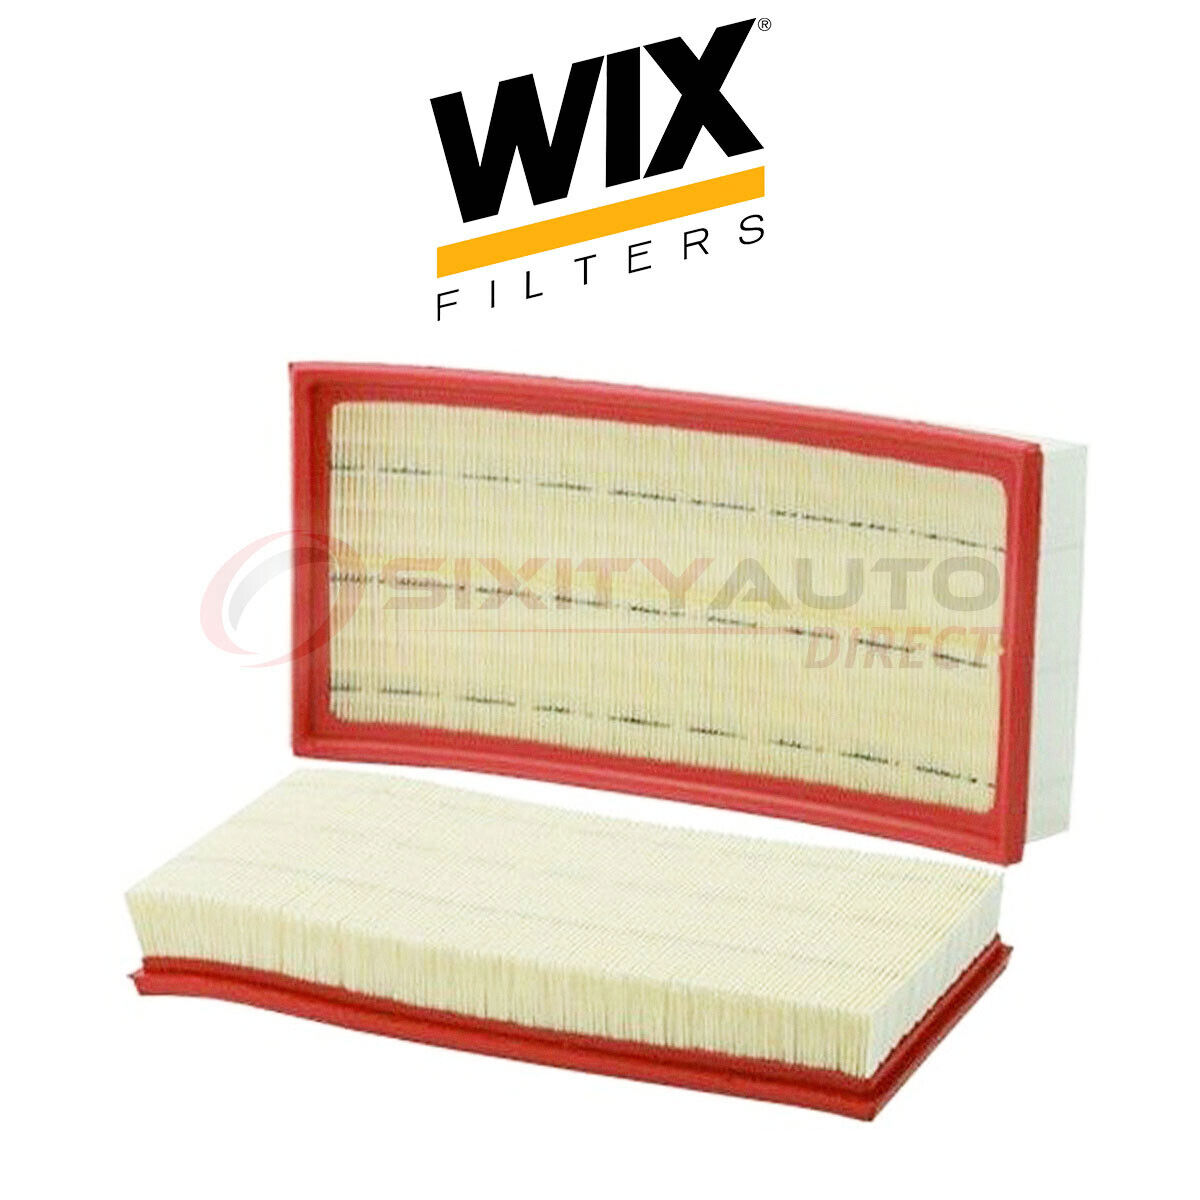 WIX Air Filter for 2001-2006 Seat Leon 1.8L L4 - Filtration System bb